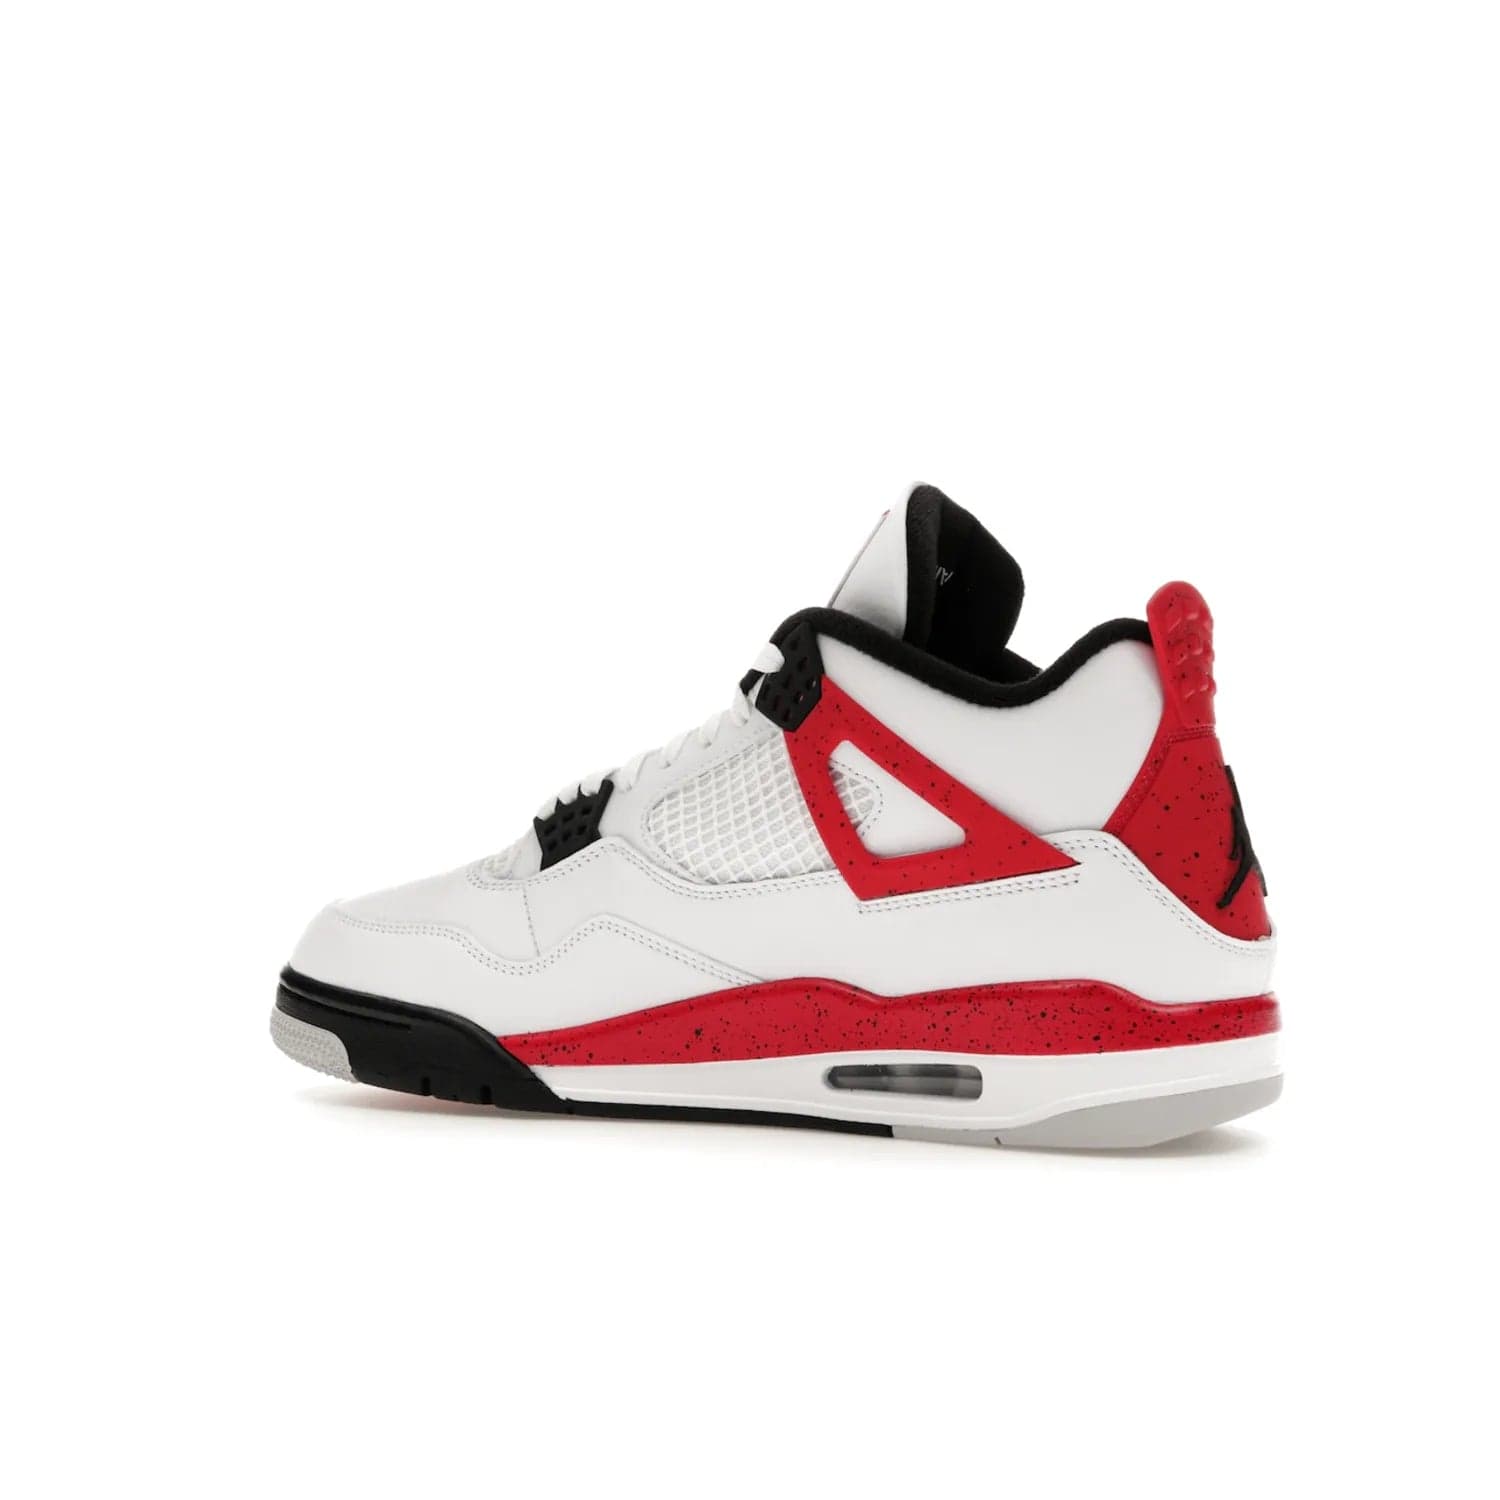 Jordan 4 Retro Red Cement - Image 22 - Only at www.BallersClubKickz.com - Iconic Jordan silhouette with a unique twist. White premium leather uppers with fire red and black detailing. Black, white, and fire red midsole with mesh detailing and Jumpman logo. Jordan 4 Retro Red Cement released with premium price.